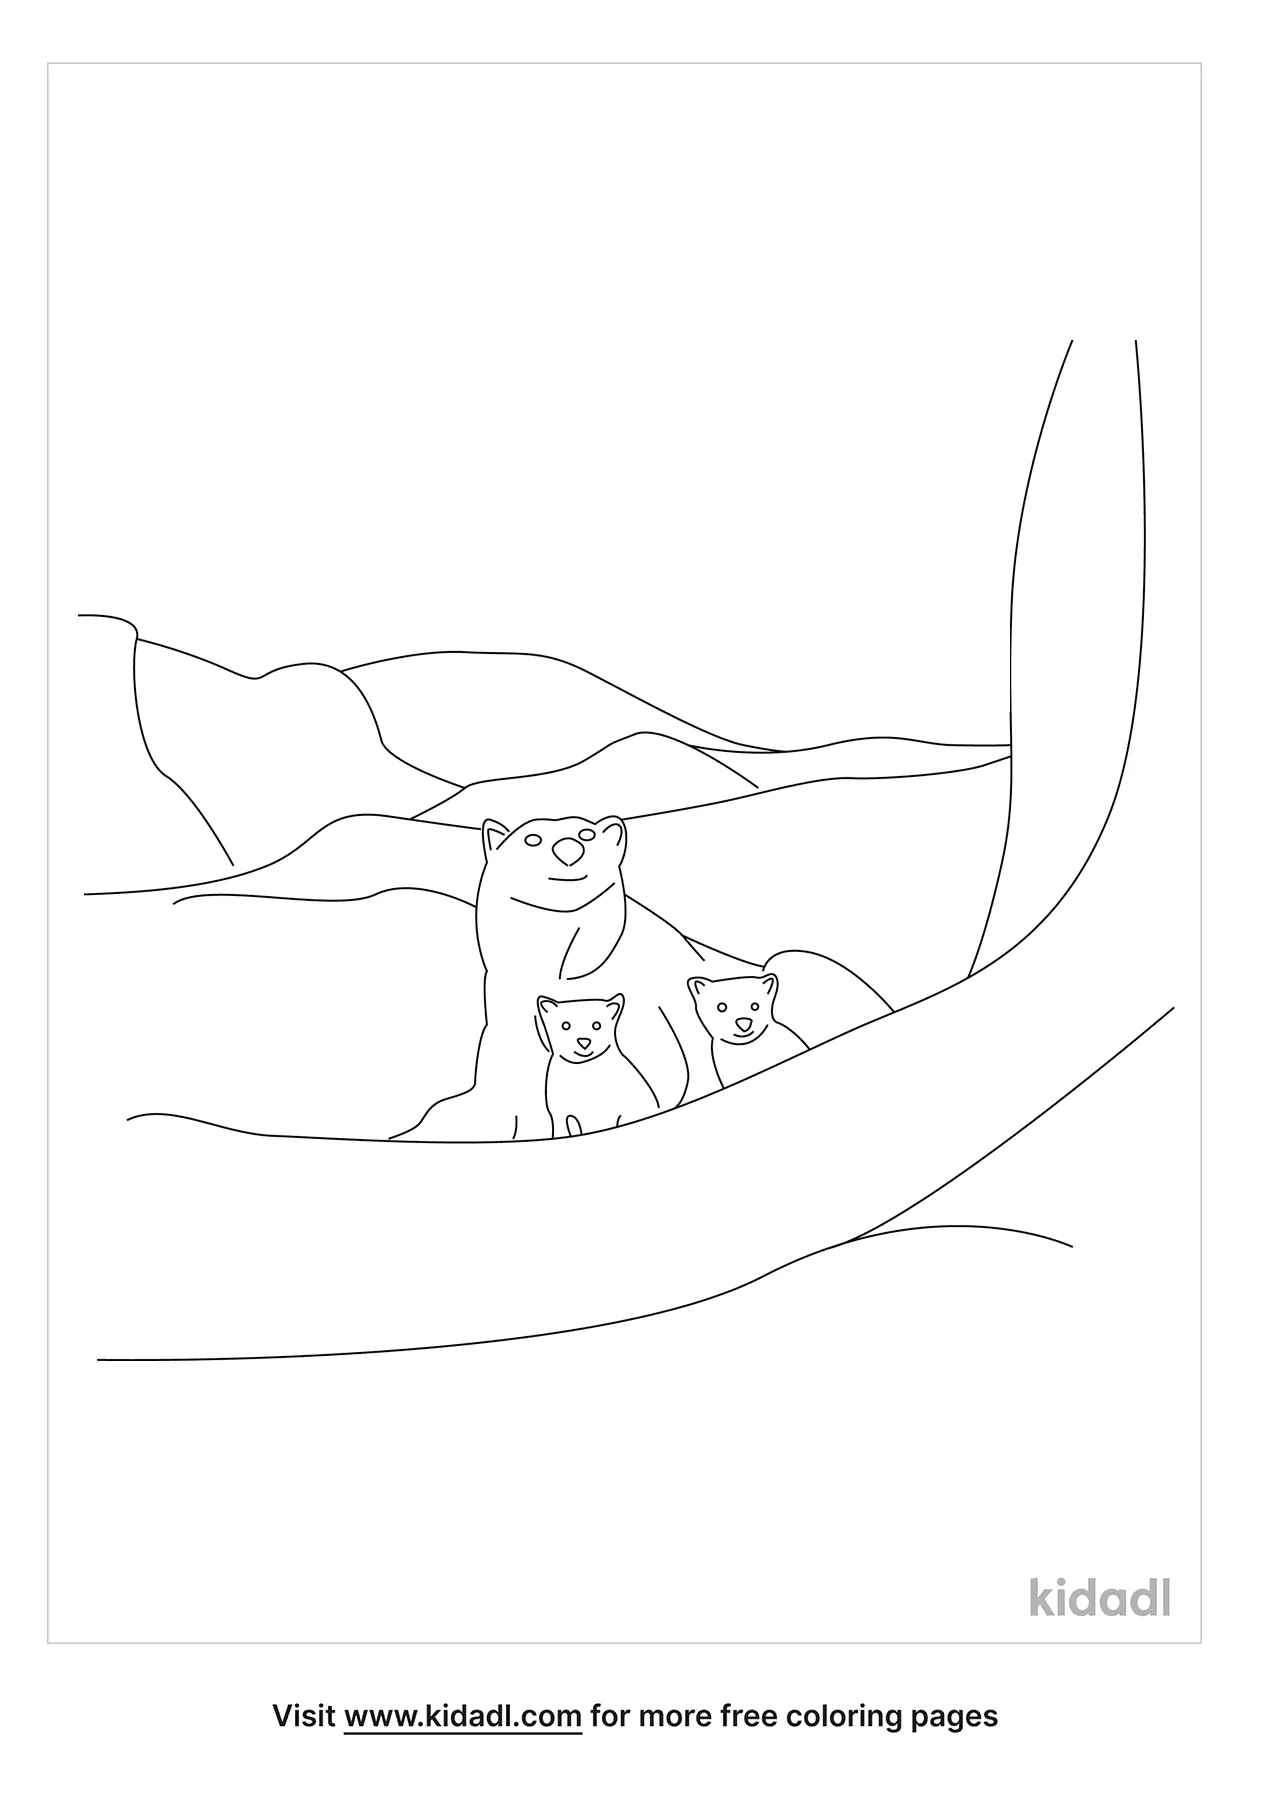 Arctic Animal Homes Coloring Page   Free Jungle animals Coloring ...